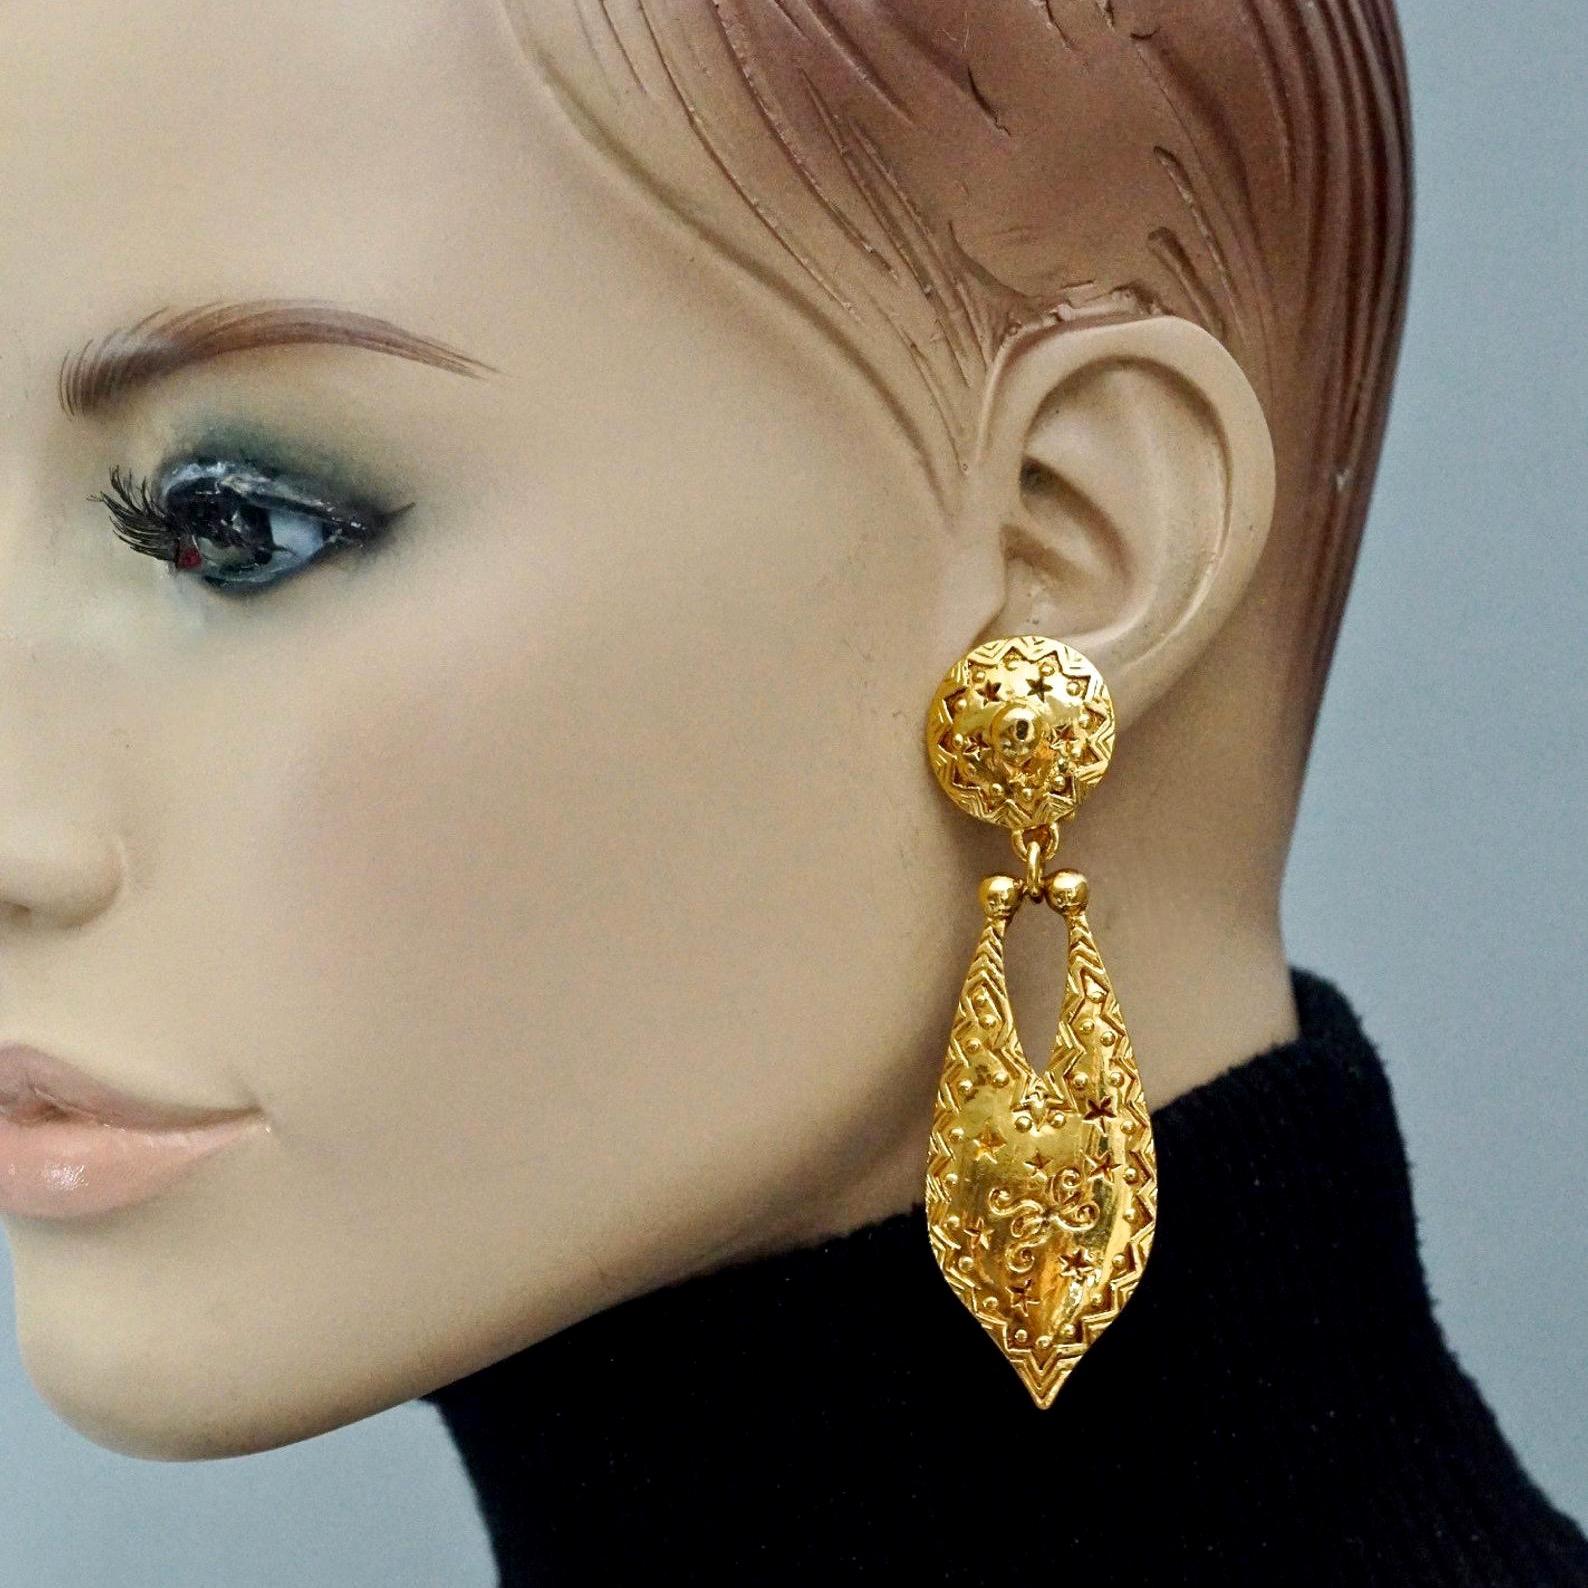 Vintage CHRISTIAN DIOR BOUTIQUE Ethnic Dangling Earrings

Measurements:
Height: 3.18 inches (8.1 cm)
Width: 0.98 inch (2.5 cm)
Weight per Earring: 19 grams

Features:
- 100% Authentic CHRISTIAN DIOR.
- Ethnic pattern dangling earrings.
- Gold